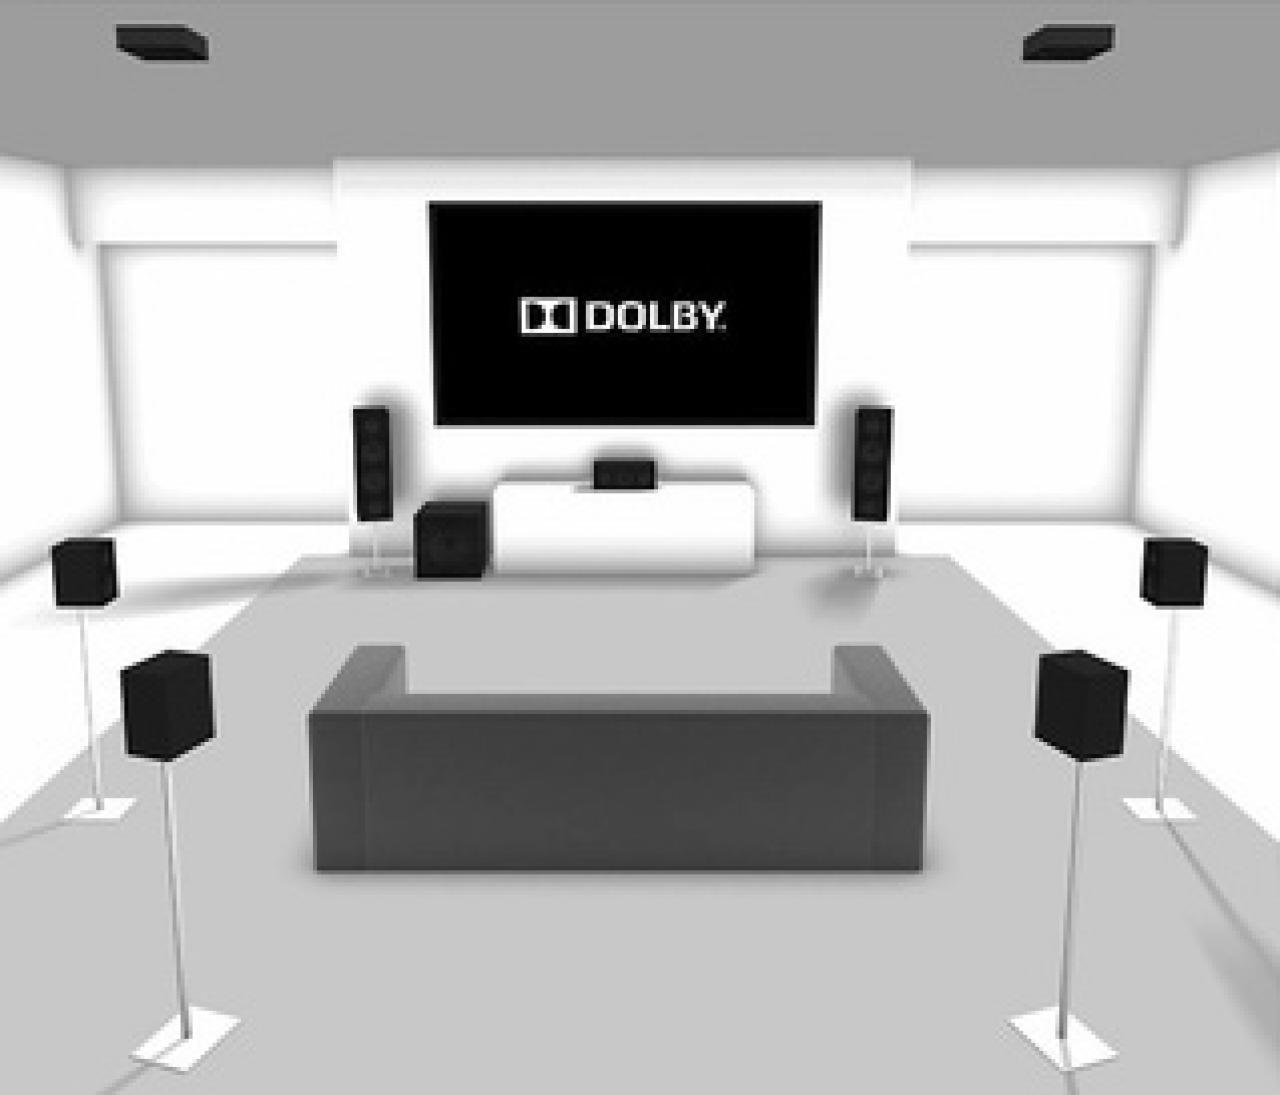 7.1.2 Dolby Atmos